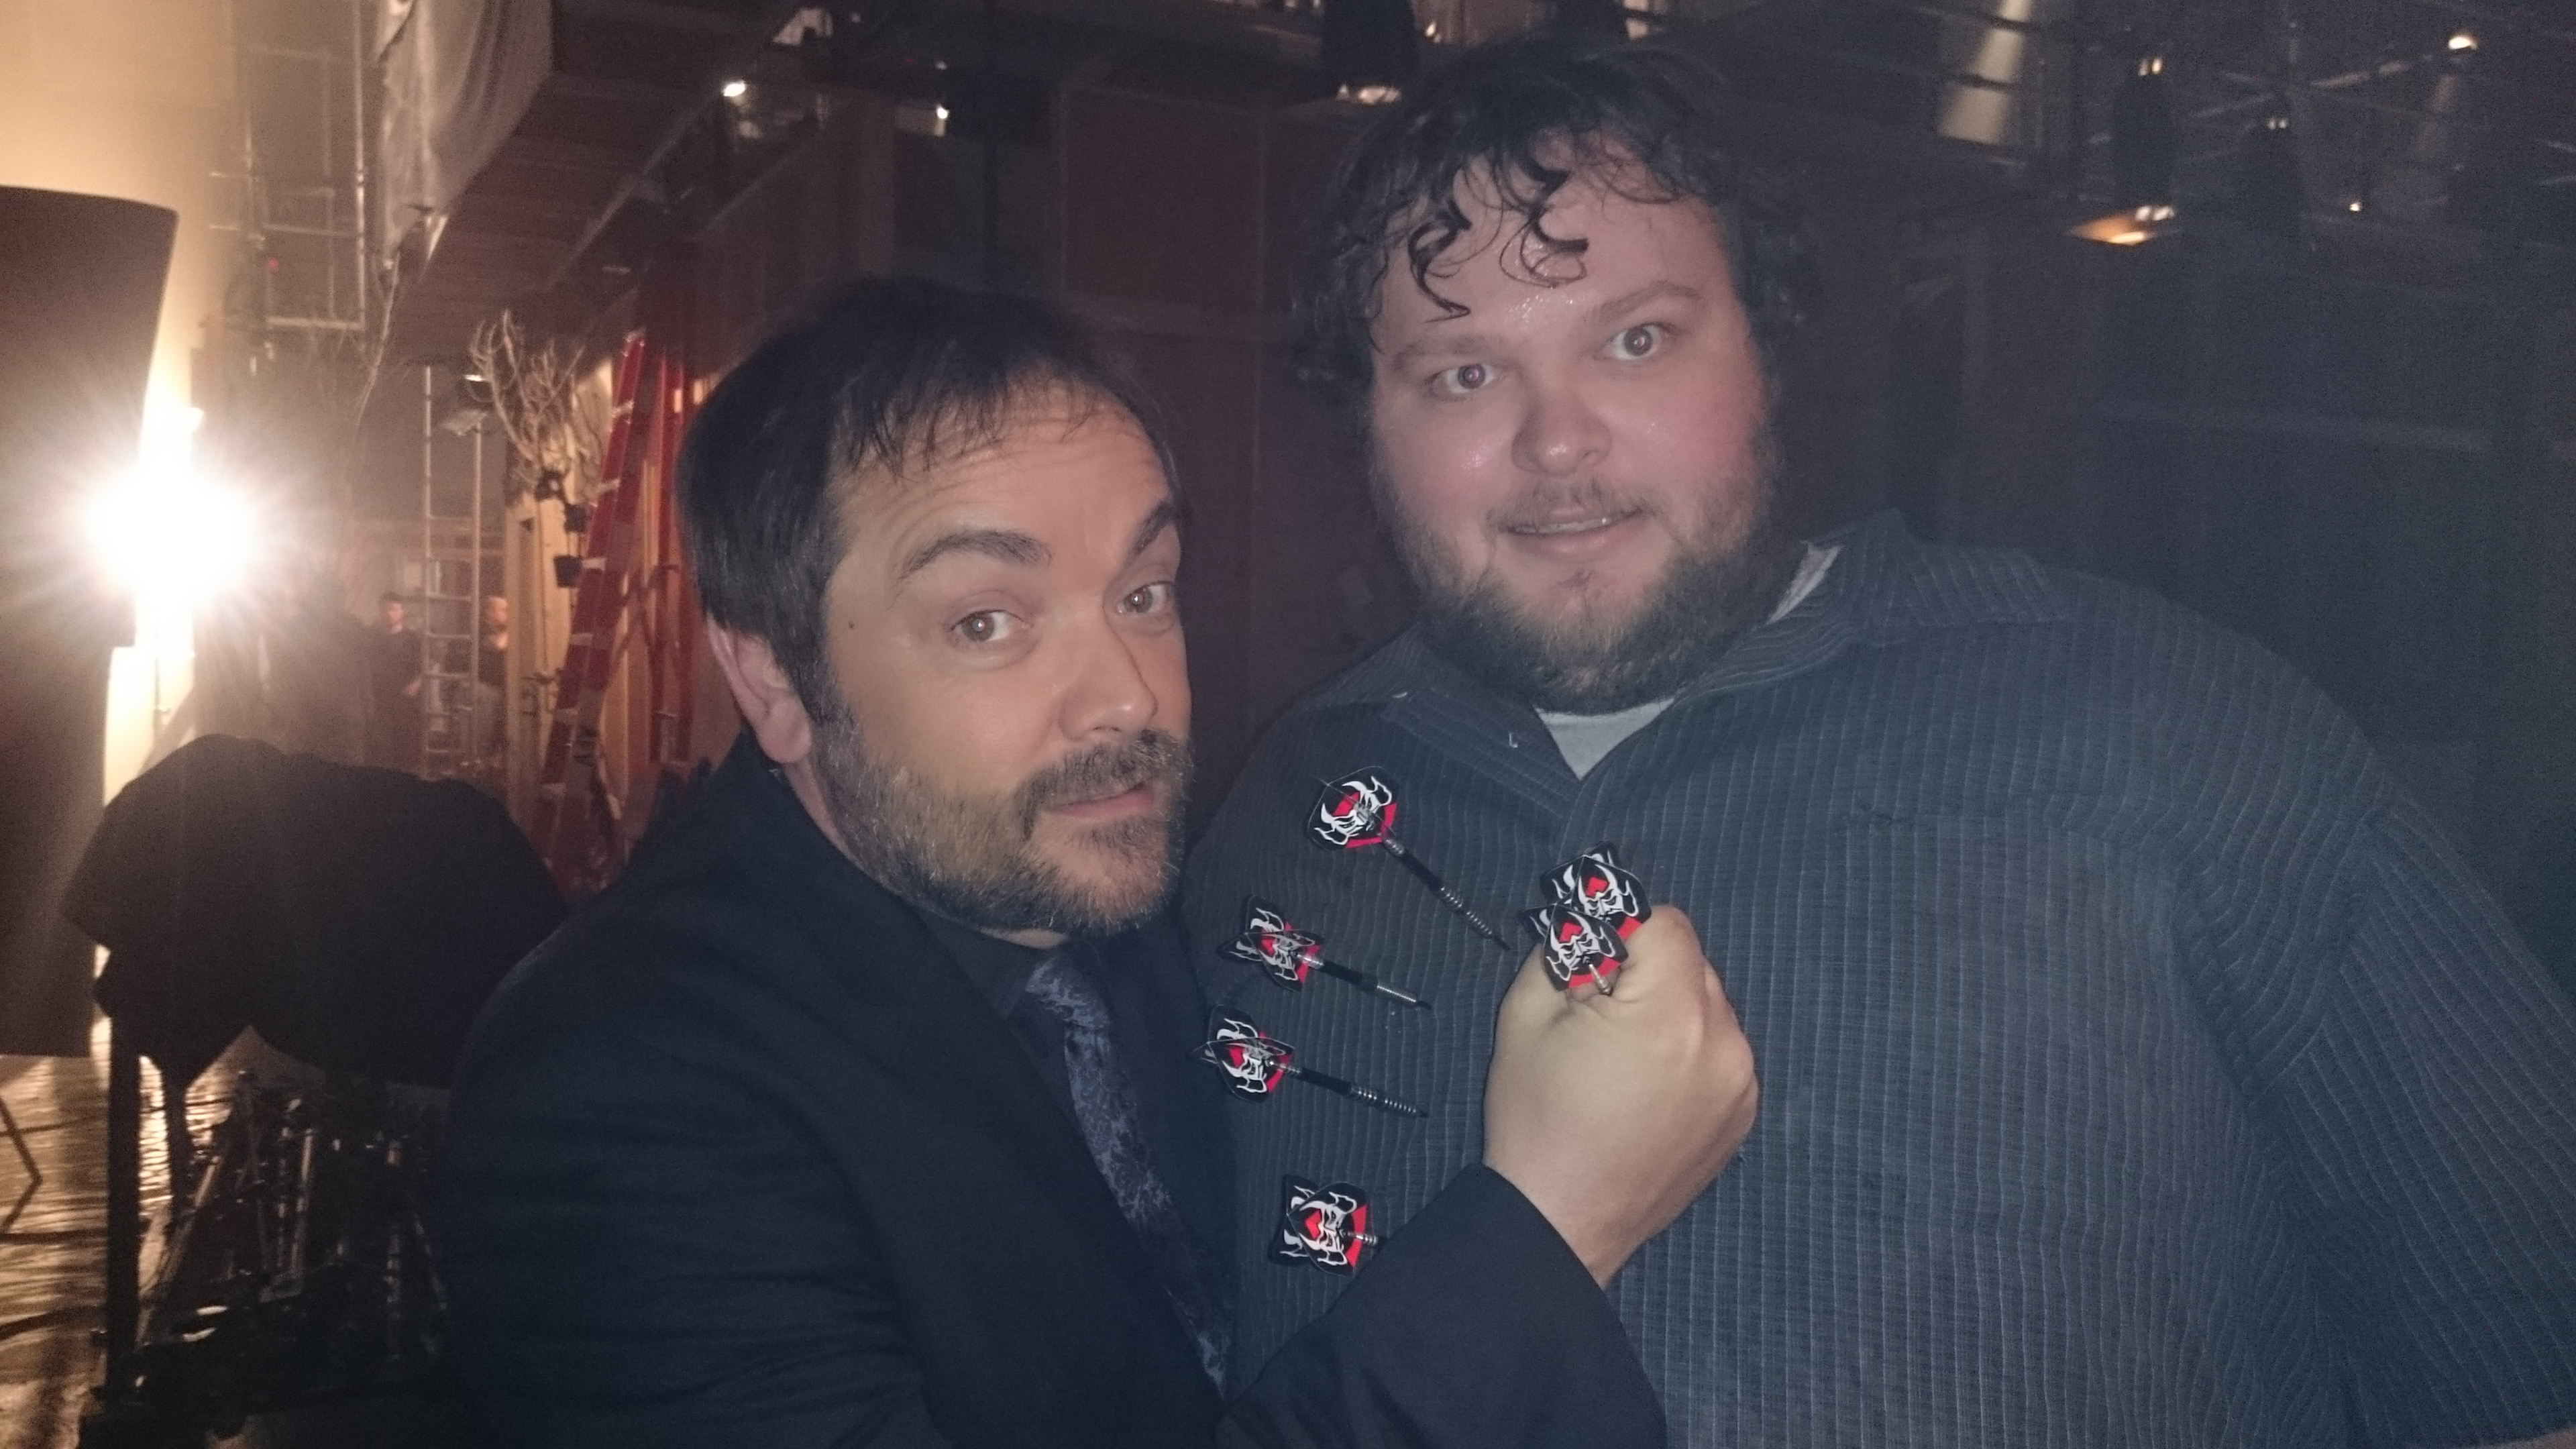 Playing a game of darts with Mark Sheppard on the set of 